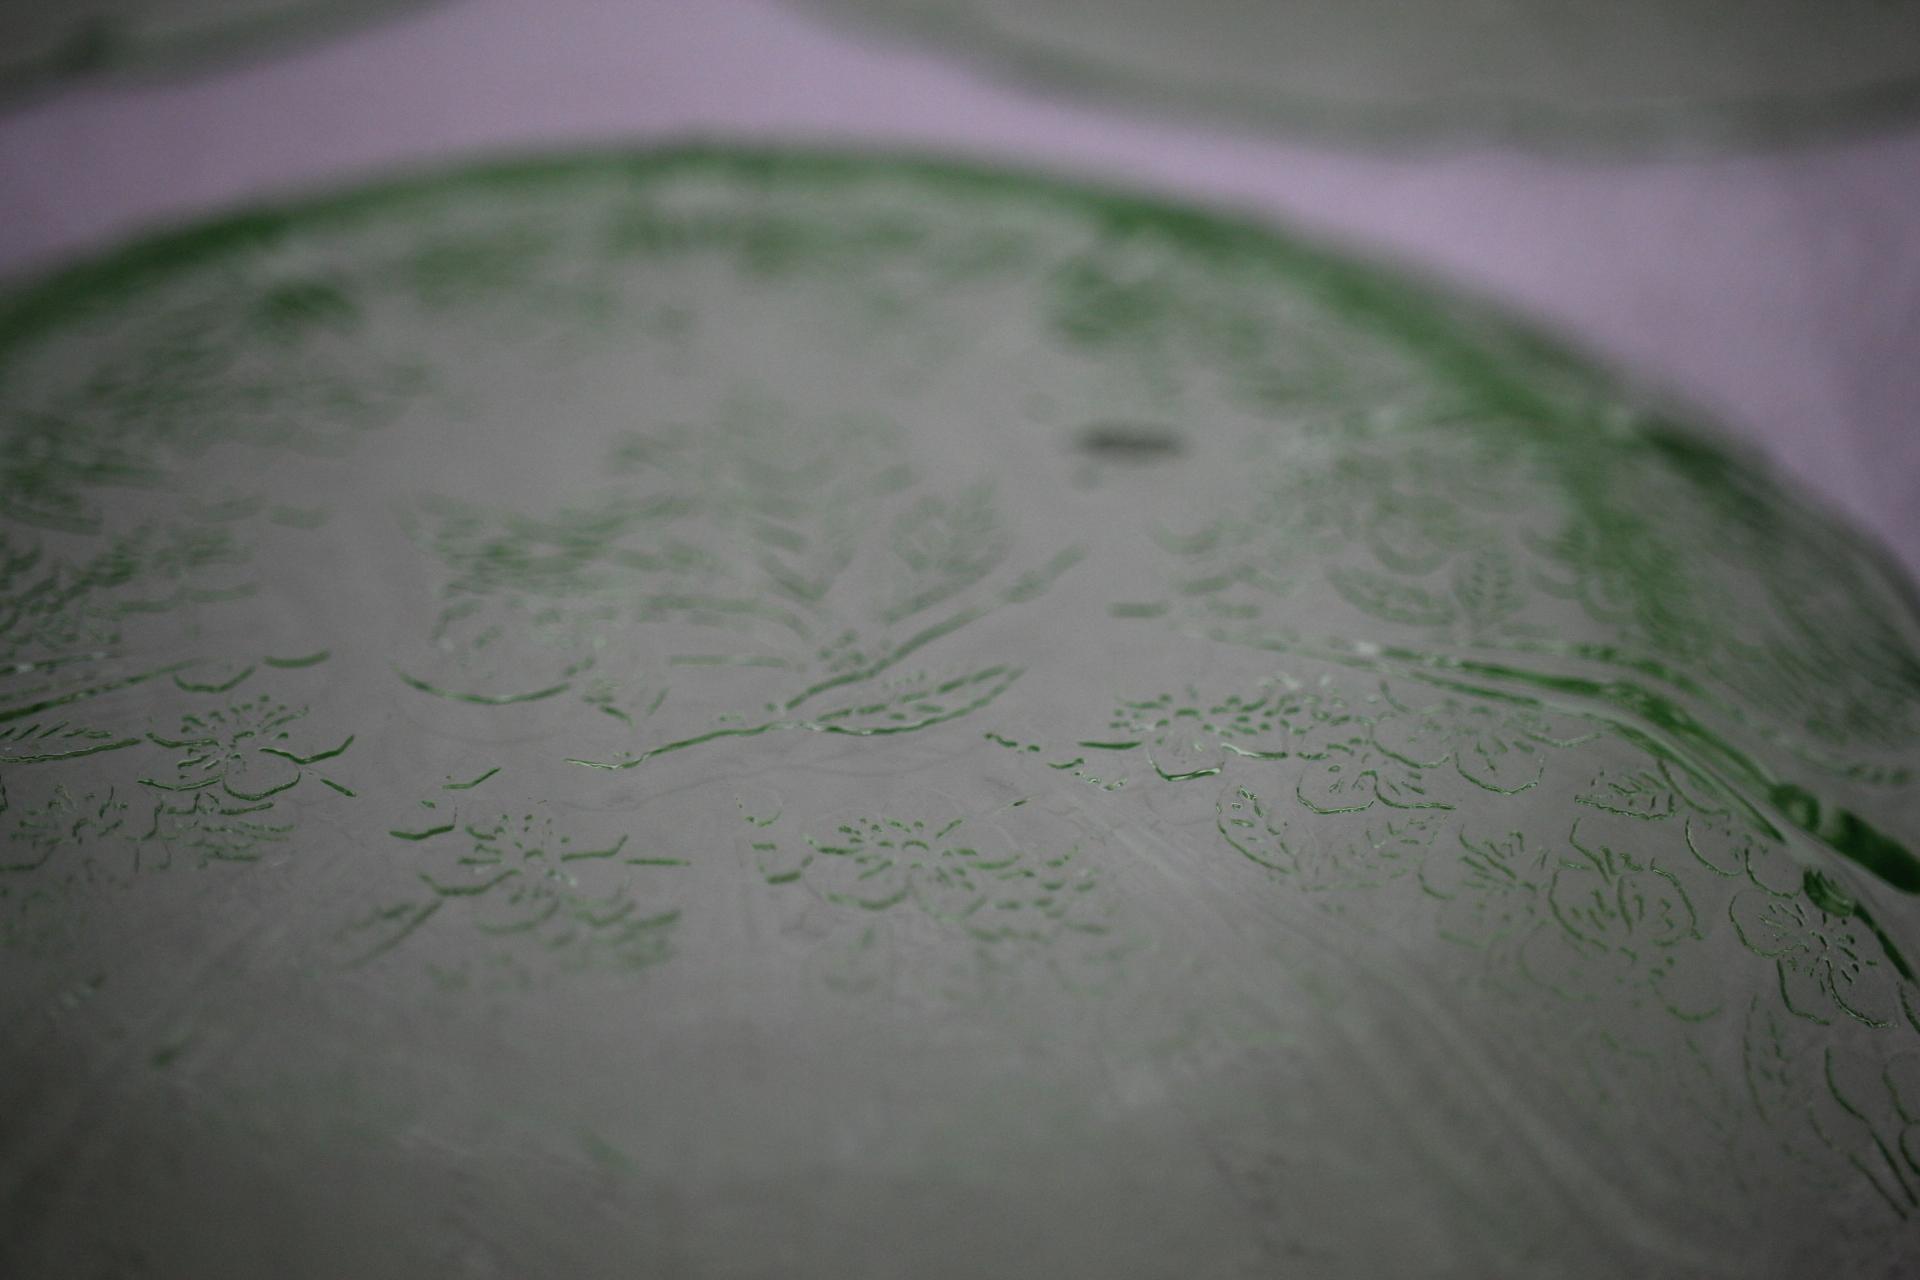 Set of 9 Green Depression Glass Plates, Cherry Blossoms, Jeanette, 7" round, 1 plate has a mark